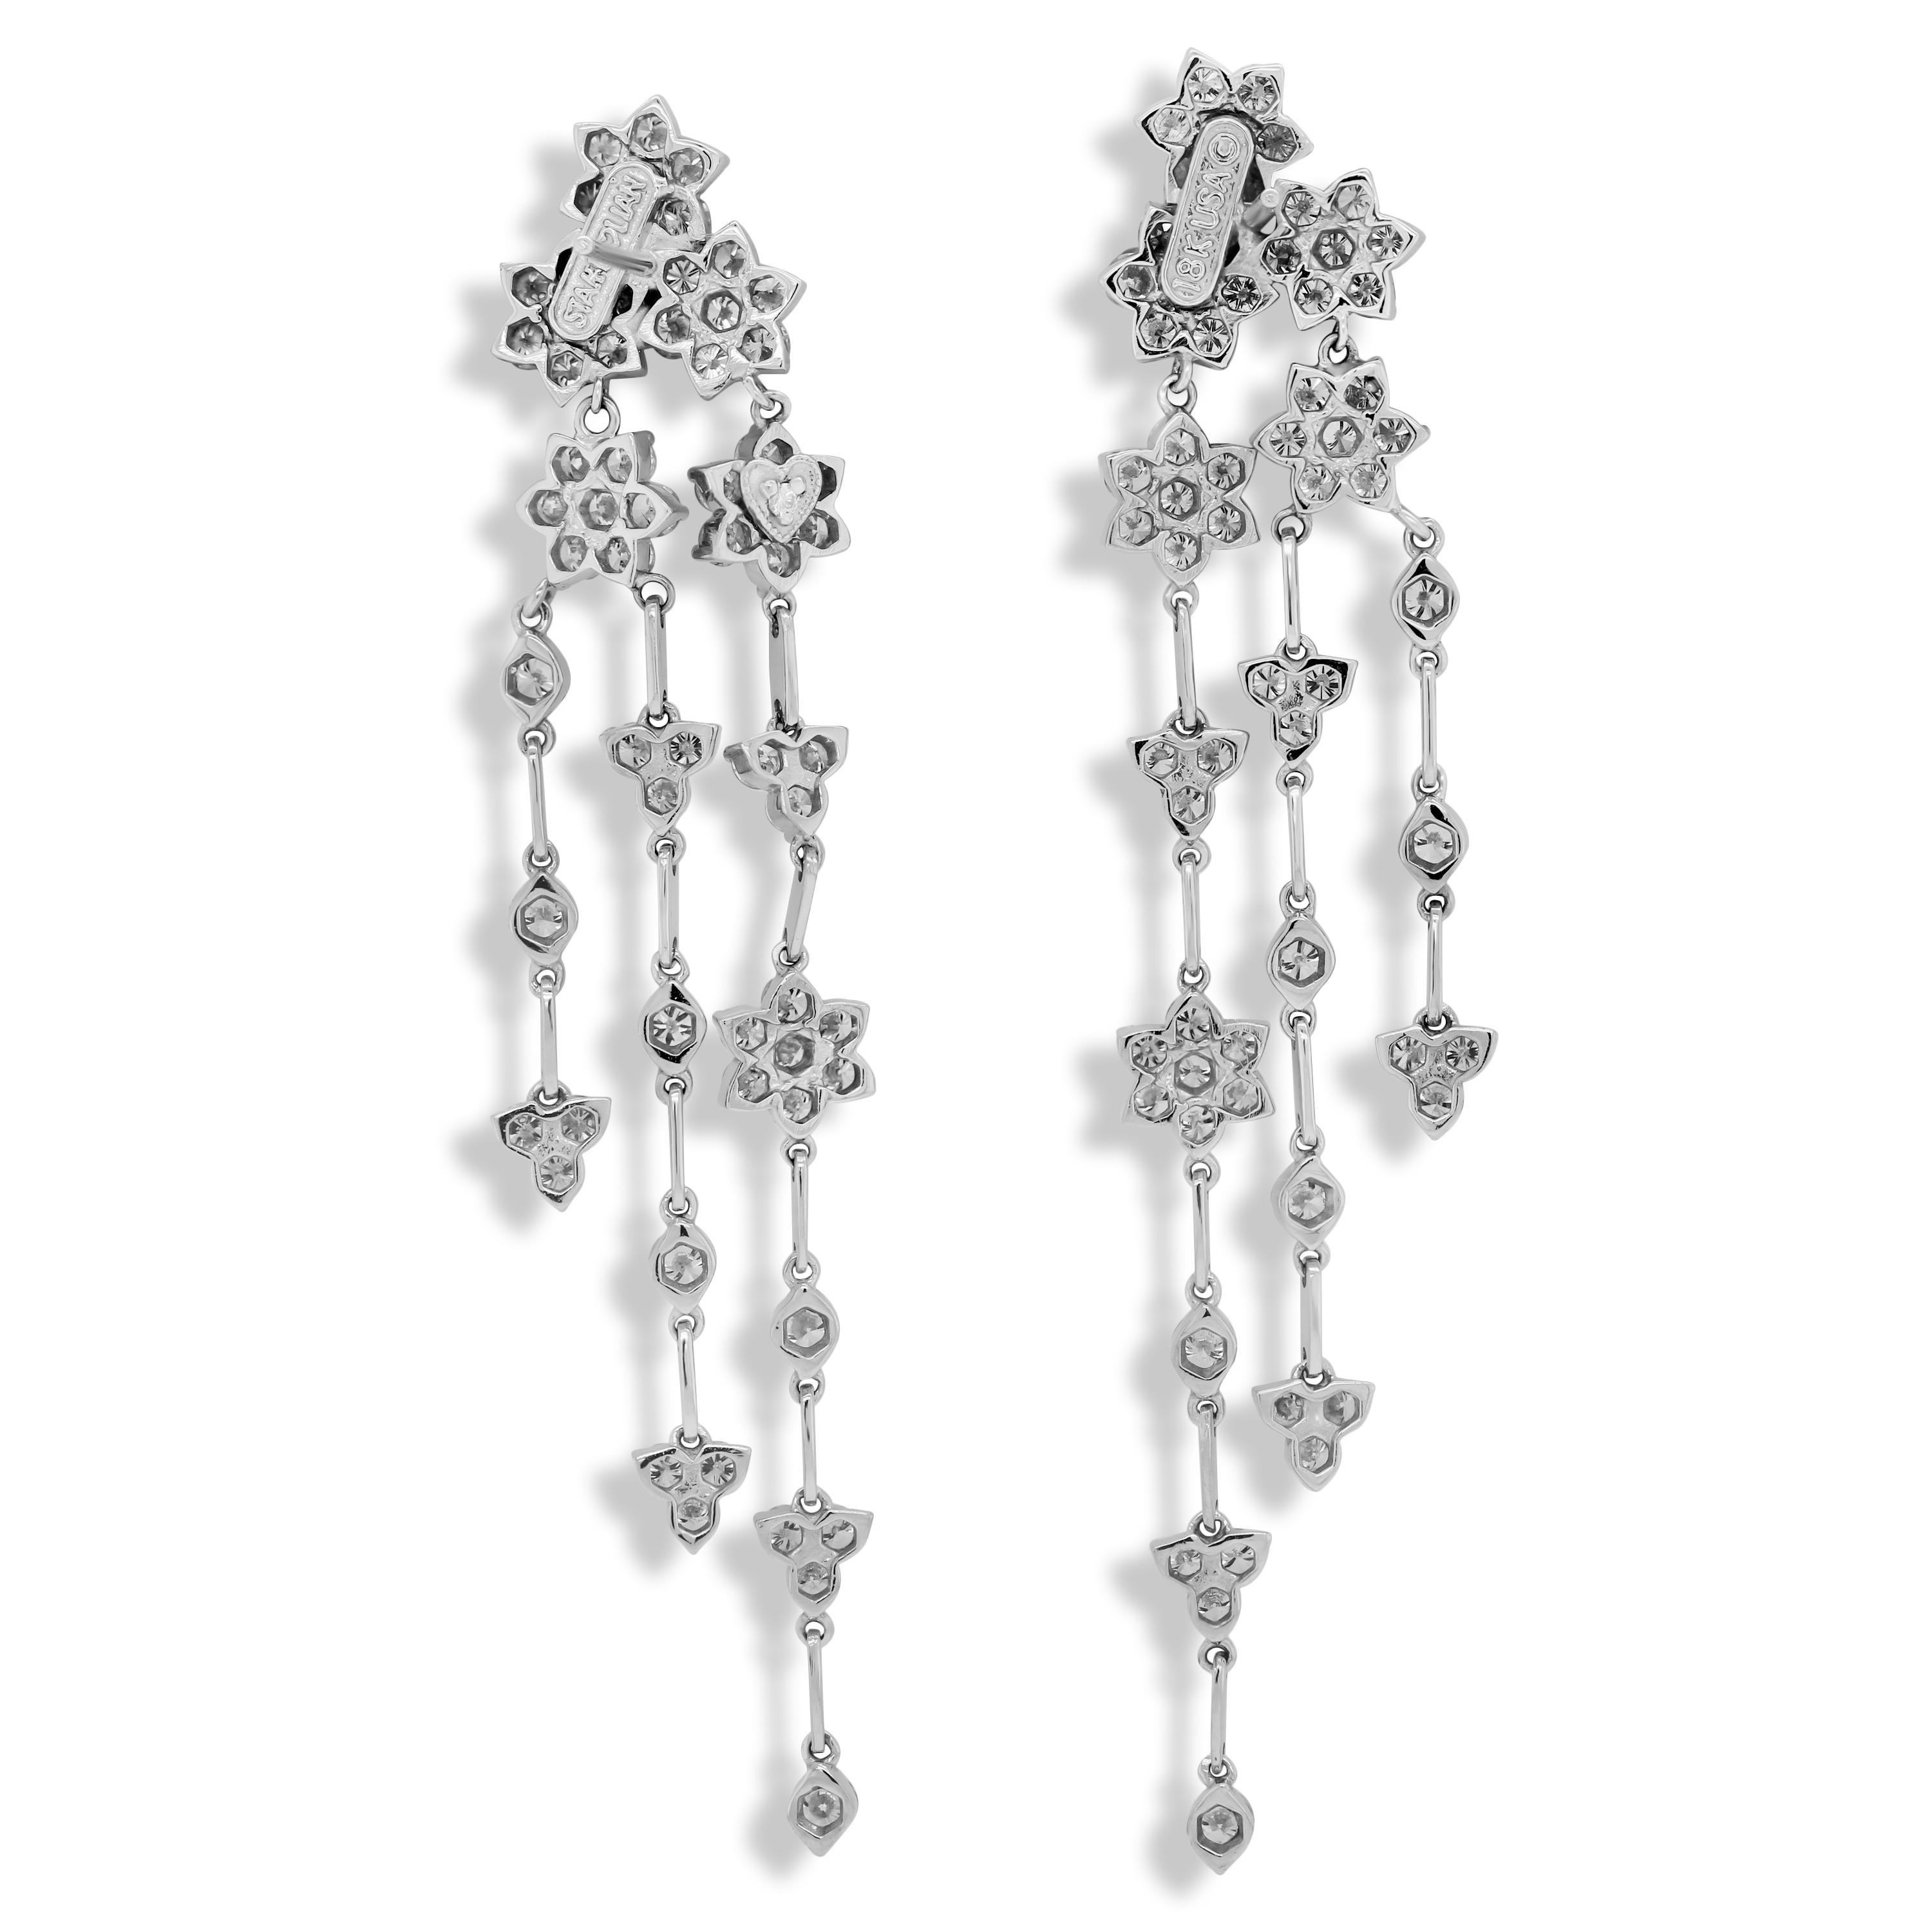 Stambolian 18K White Gold and Diamond Clusters Chandelier Dangle Earrings

6.14 carat G color VS Clarity diamonds

Post-omega backs used for security.

Earrings are 3 inches in length x 0.6 inch width

Signed Stambolian and has the Trademark